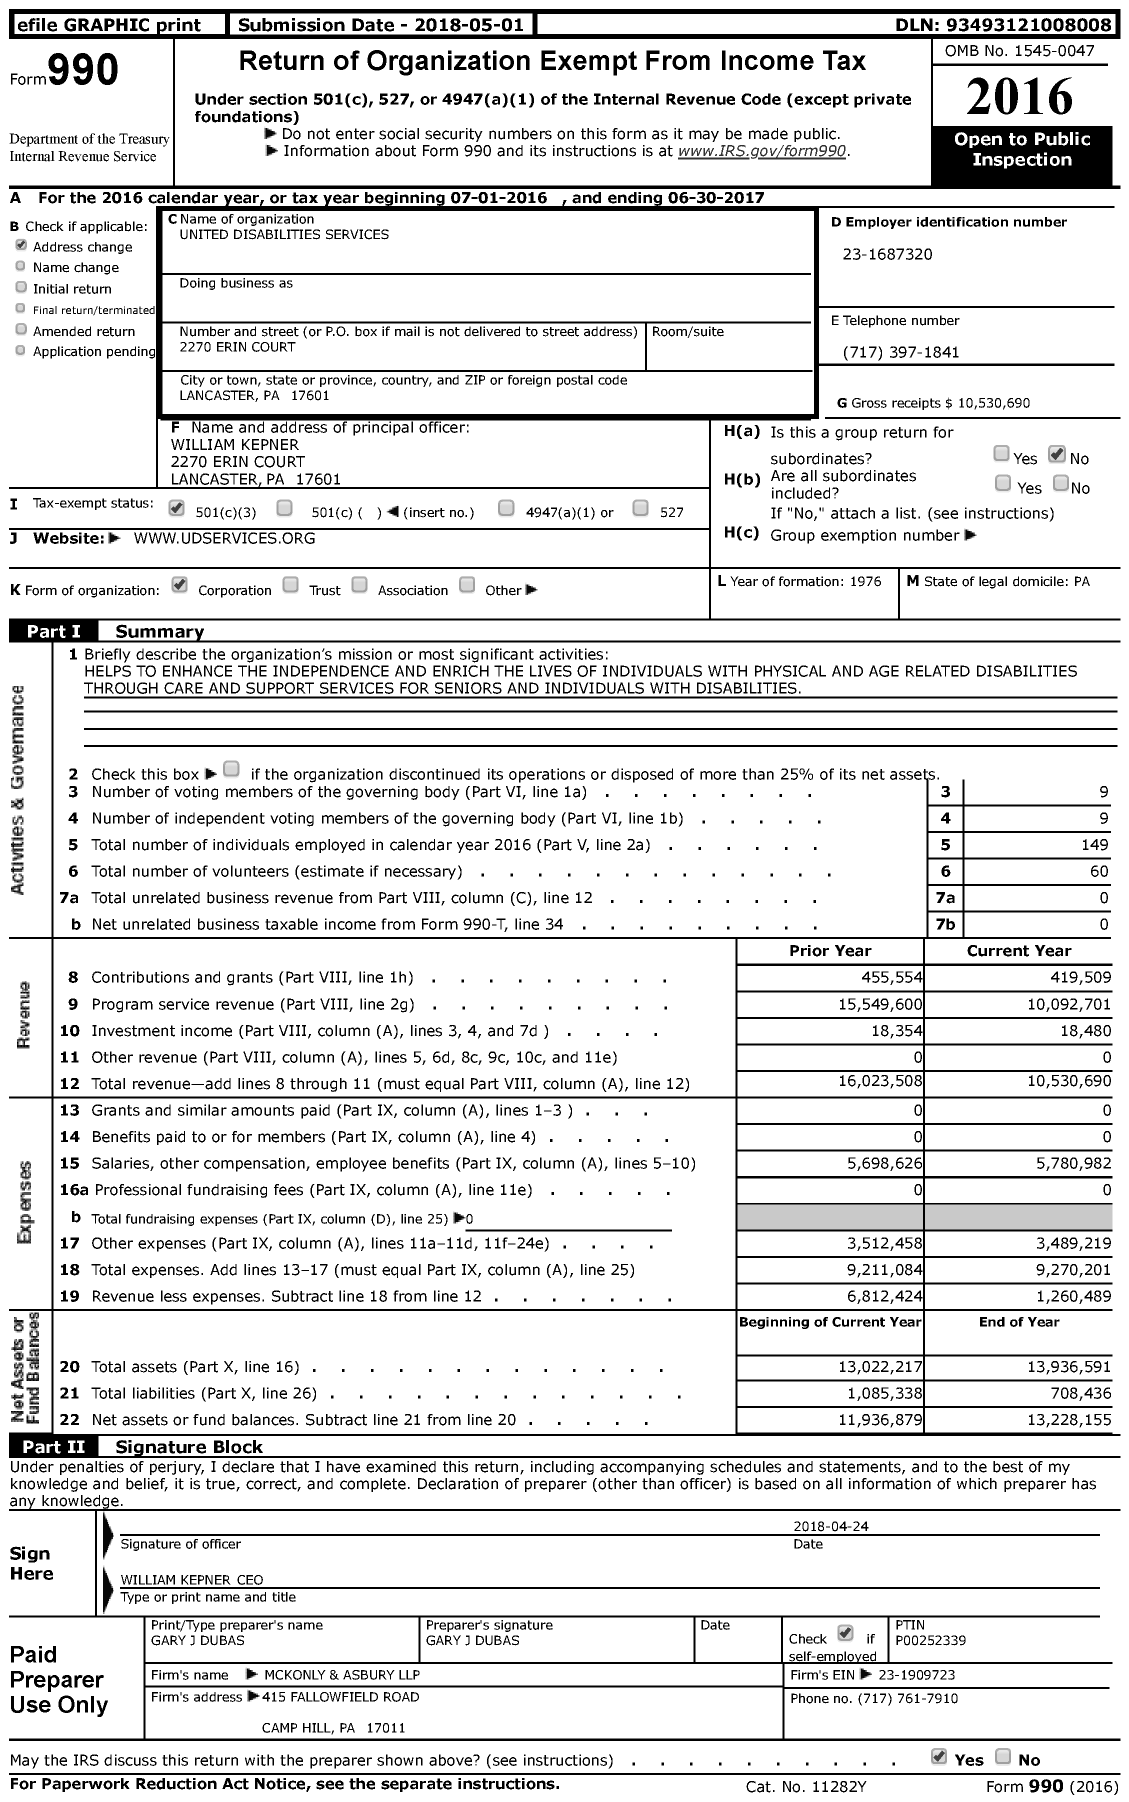 Image of first page of 2016 Form 990 for United Disabilities Services (UDS)